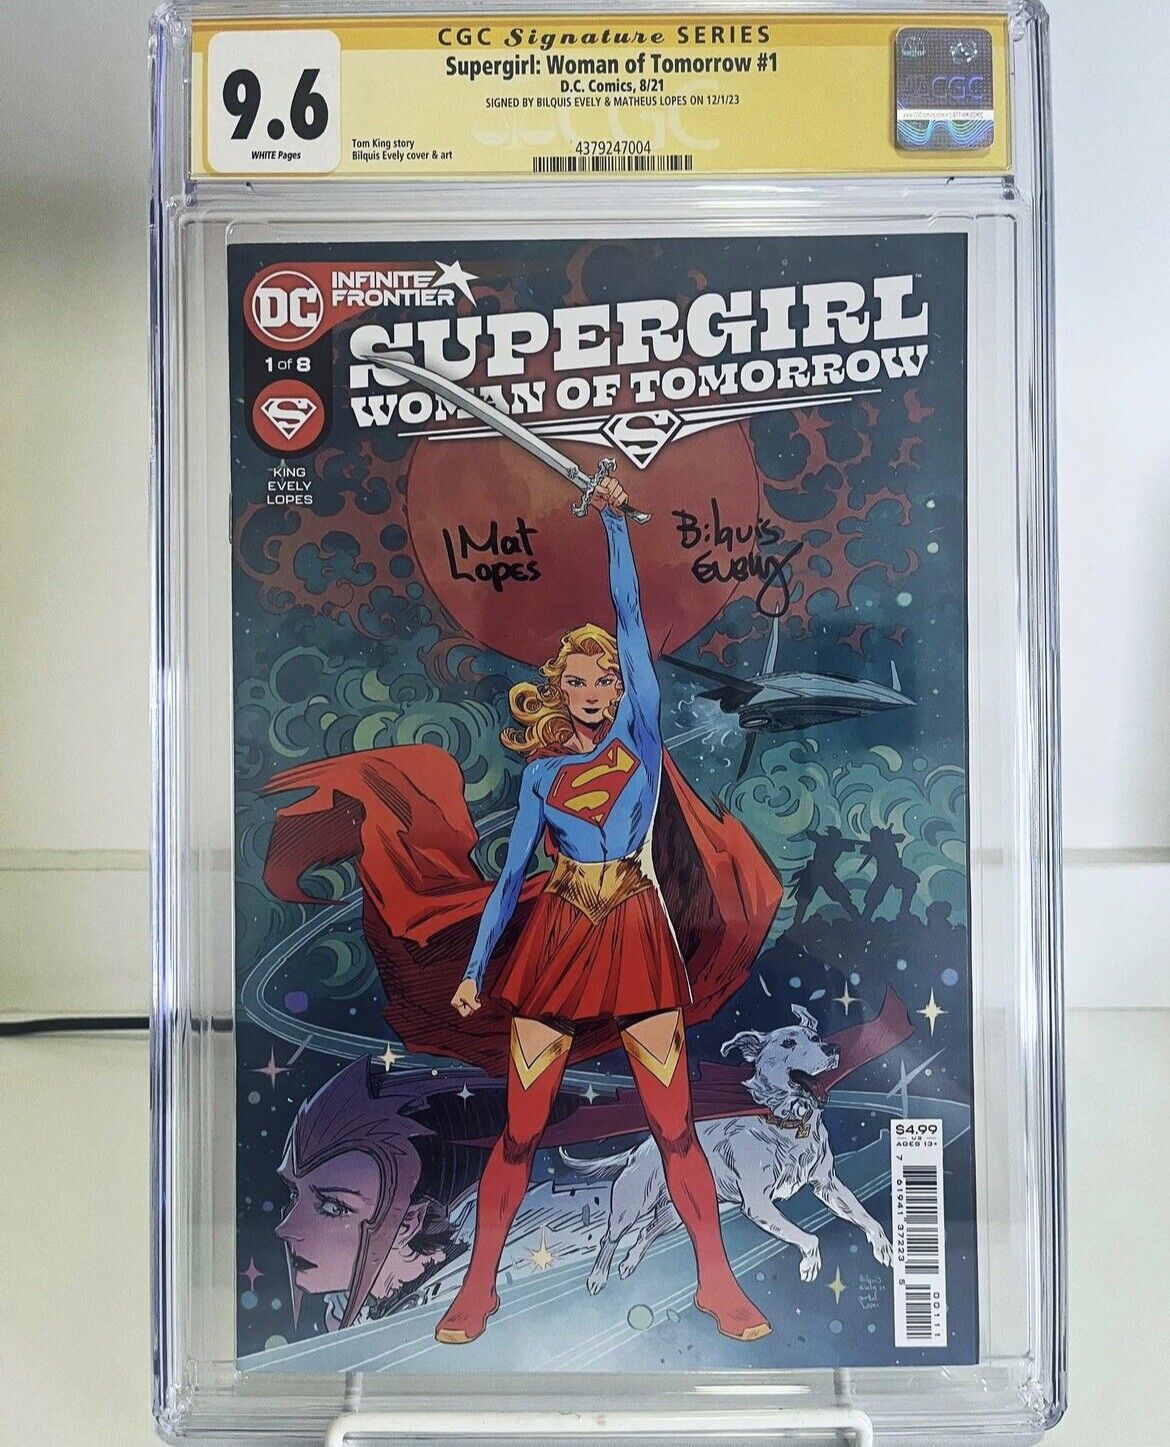 Supergirl Woman of Tomorrow #1 CGC 9.6 NM+ 2x Signed Evely/Lopes *ONLY ONE*